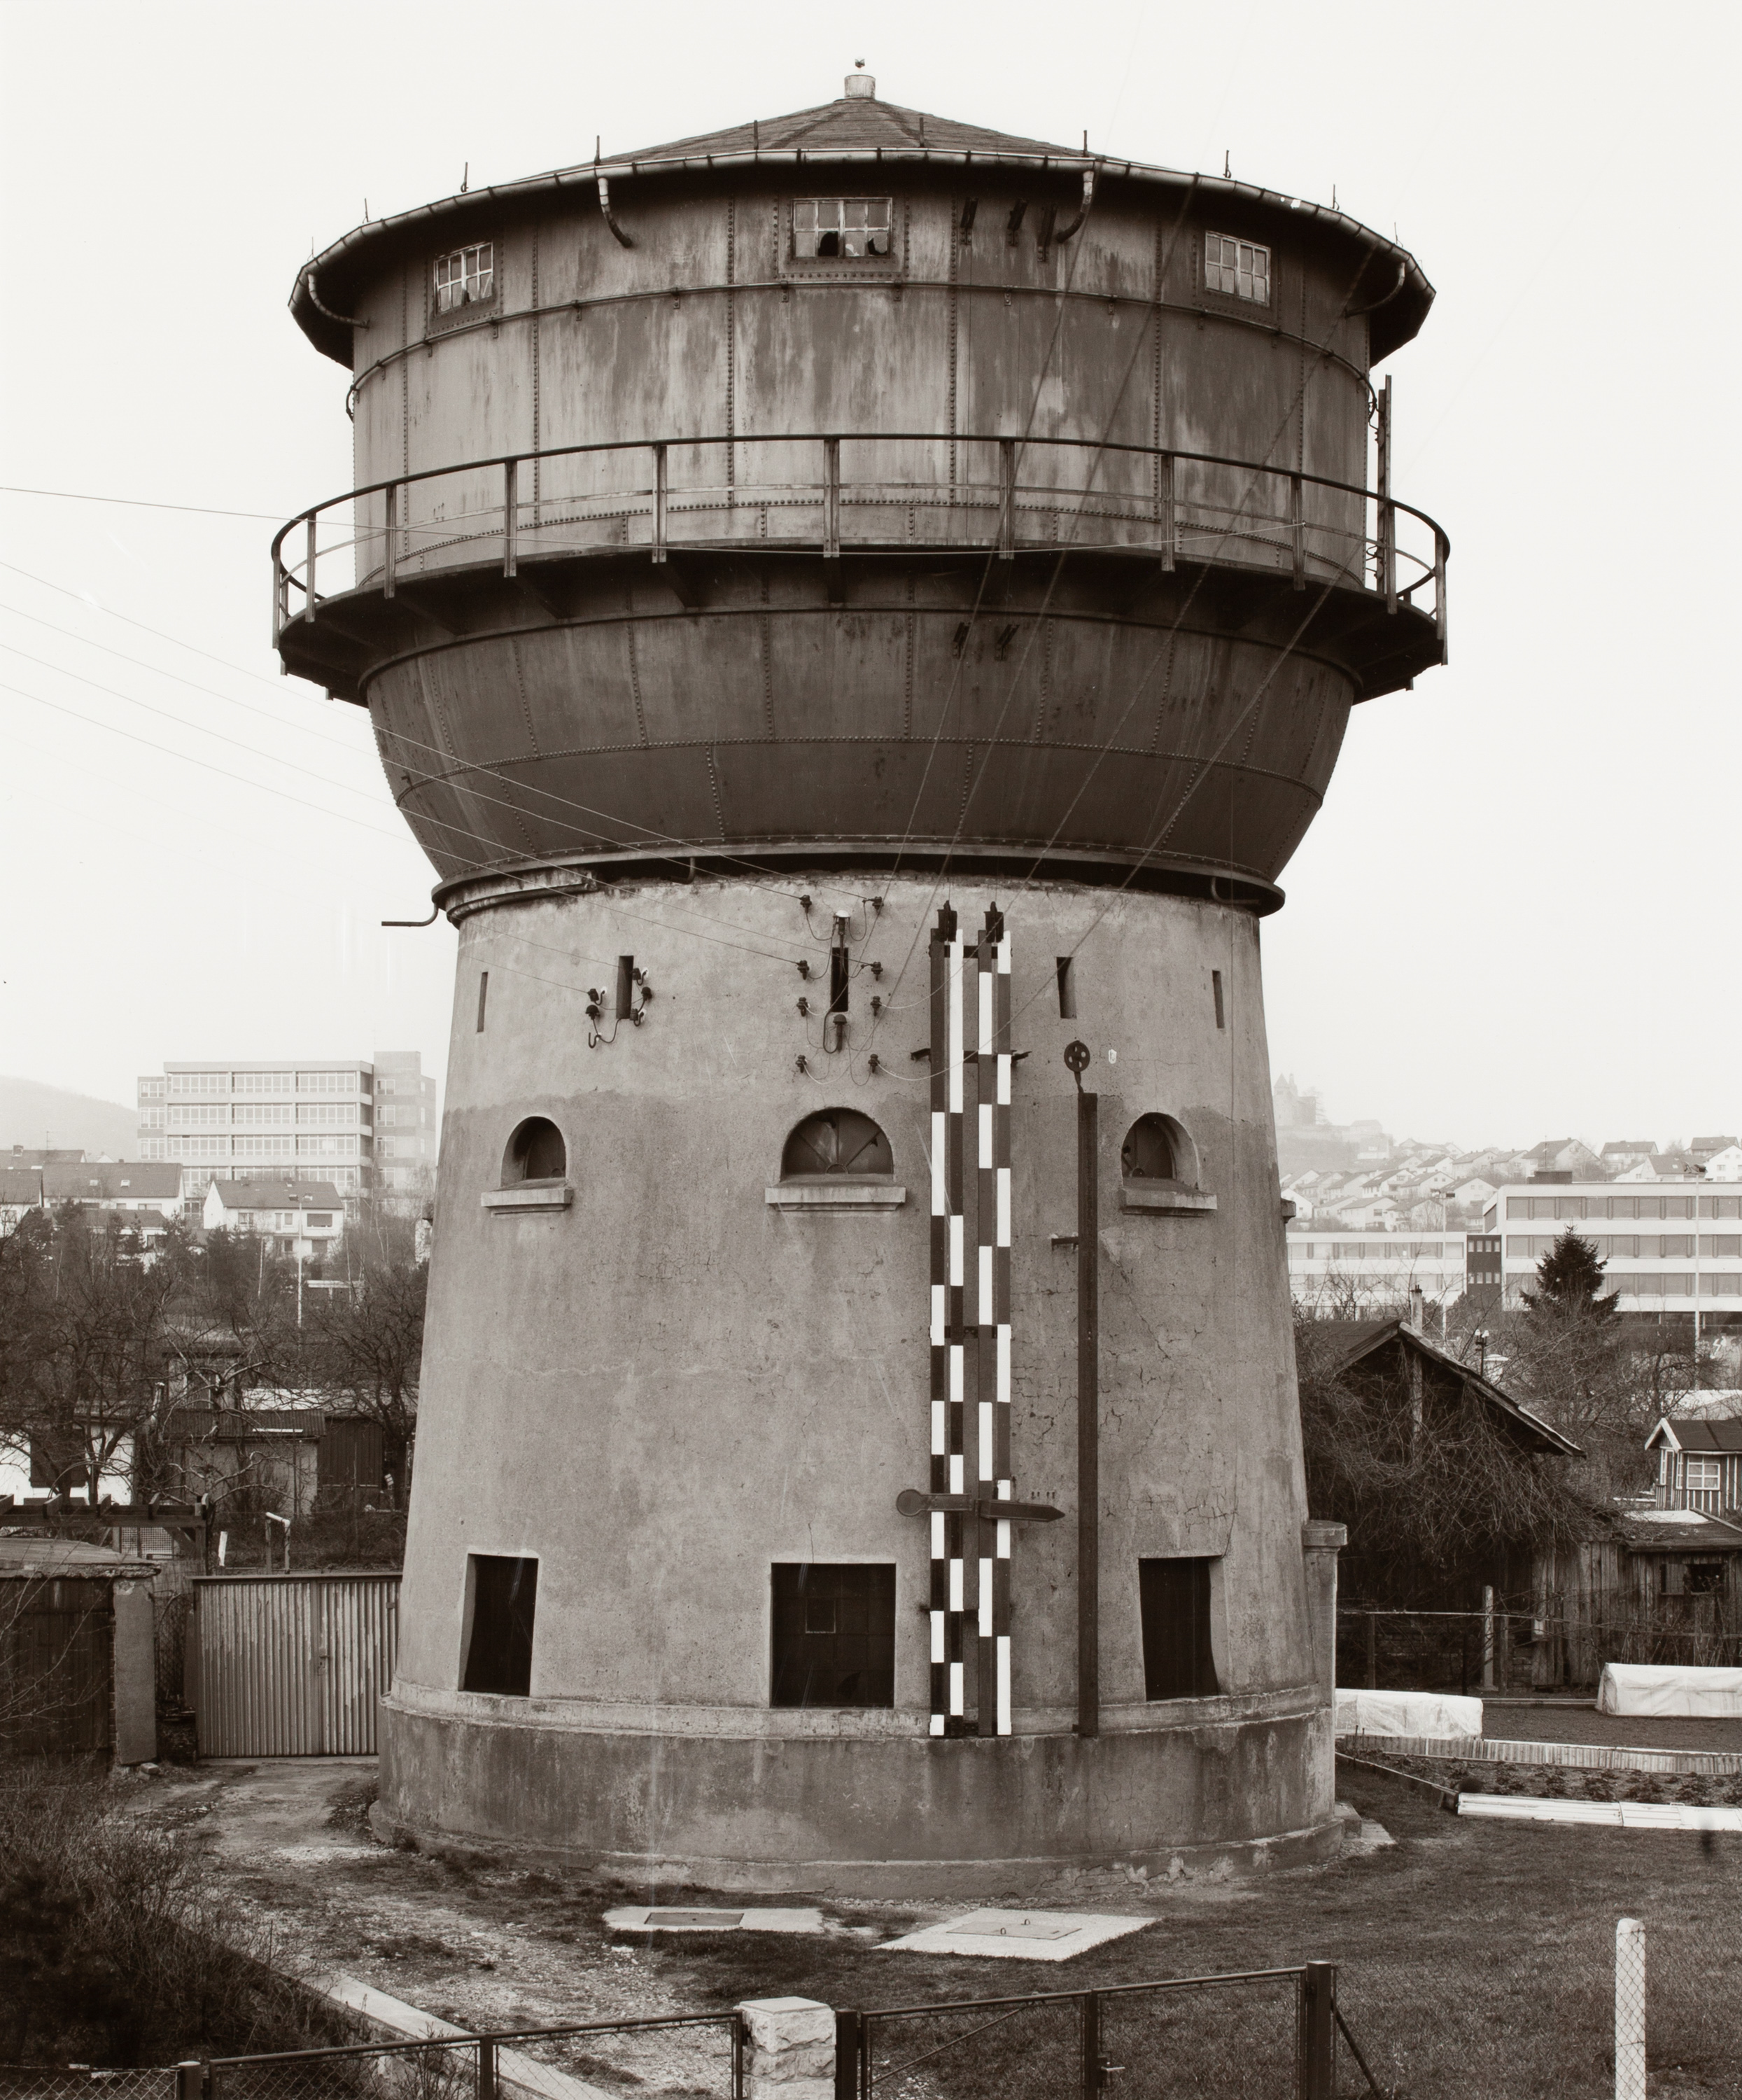 Black and white photograph of a water tower among residential homes with larger city on the horizon